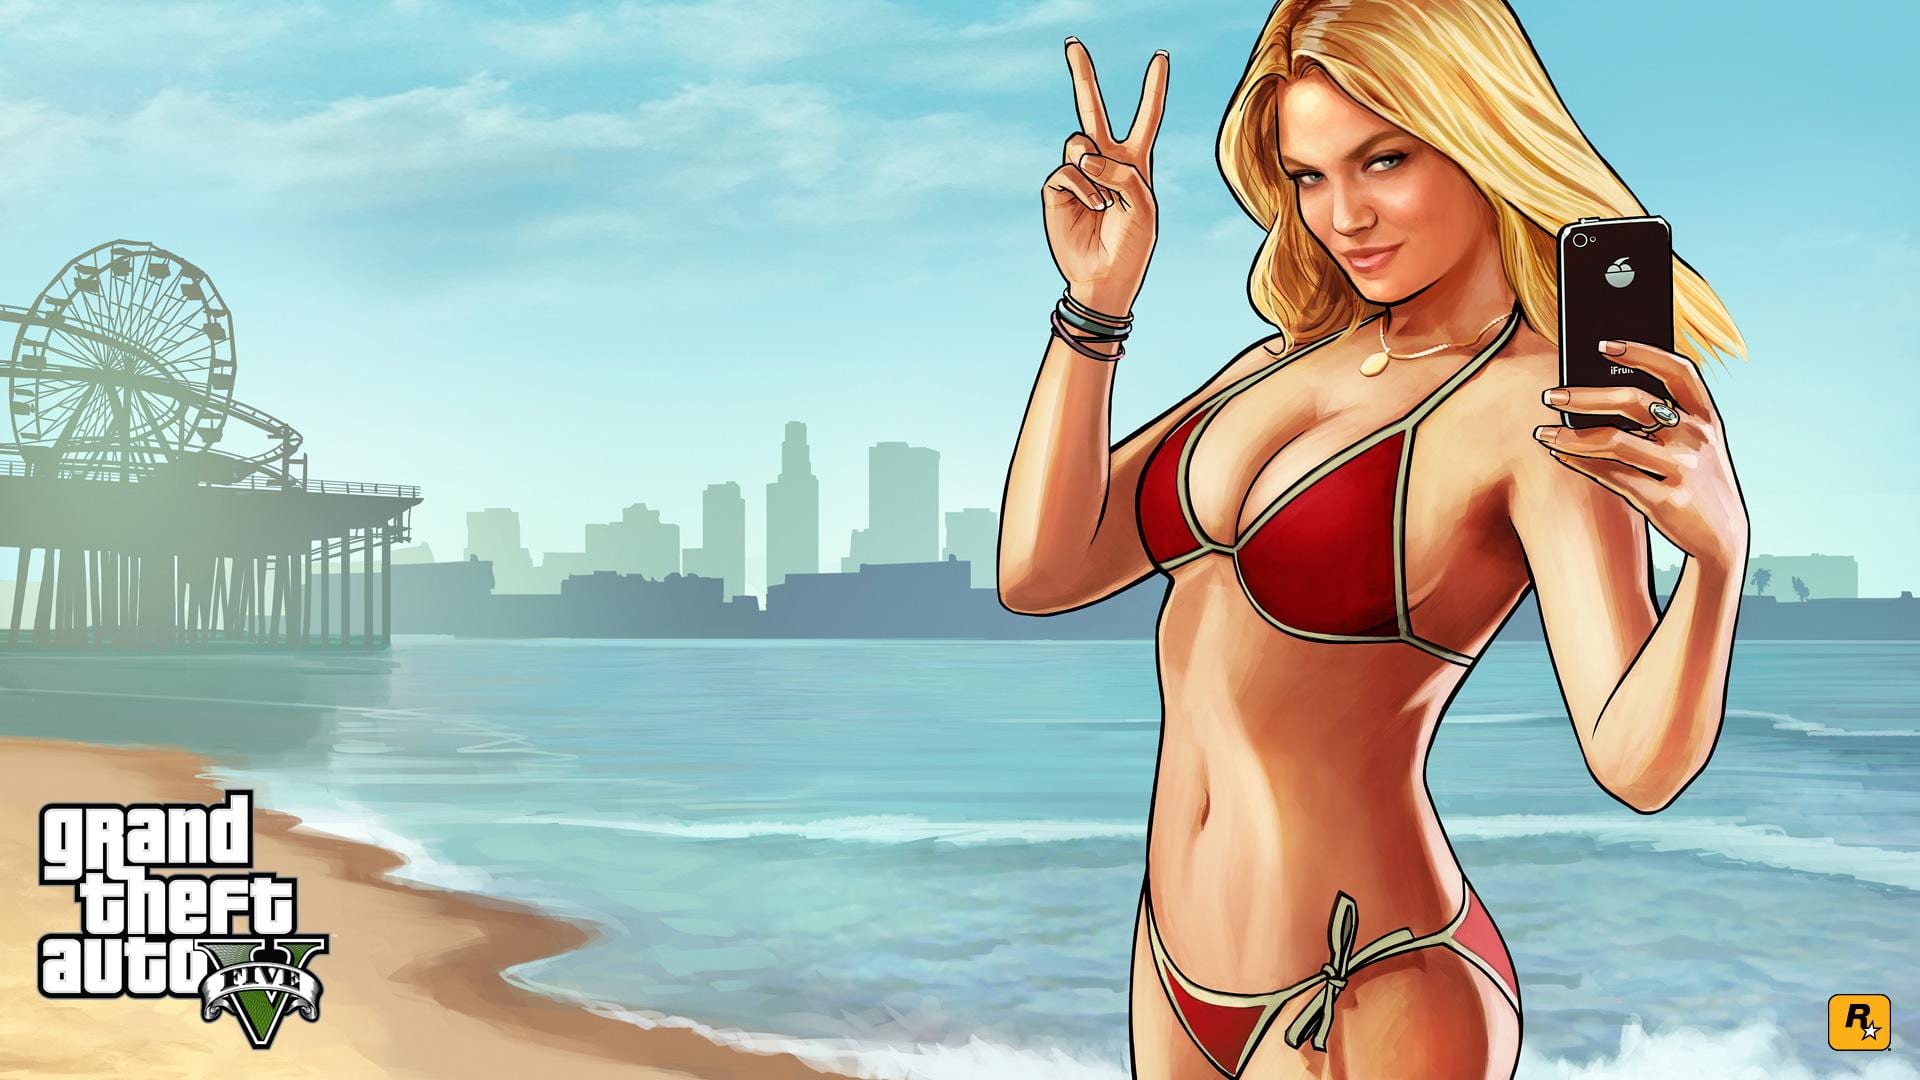 gta-v-ps4-update-1-38-is-out-now-massive-patch-notes-available-inside-player-assist-game